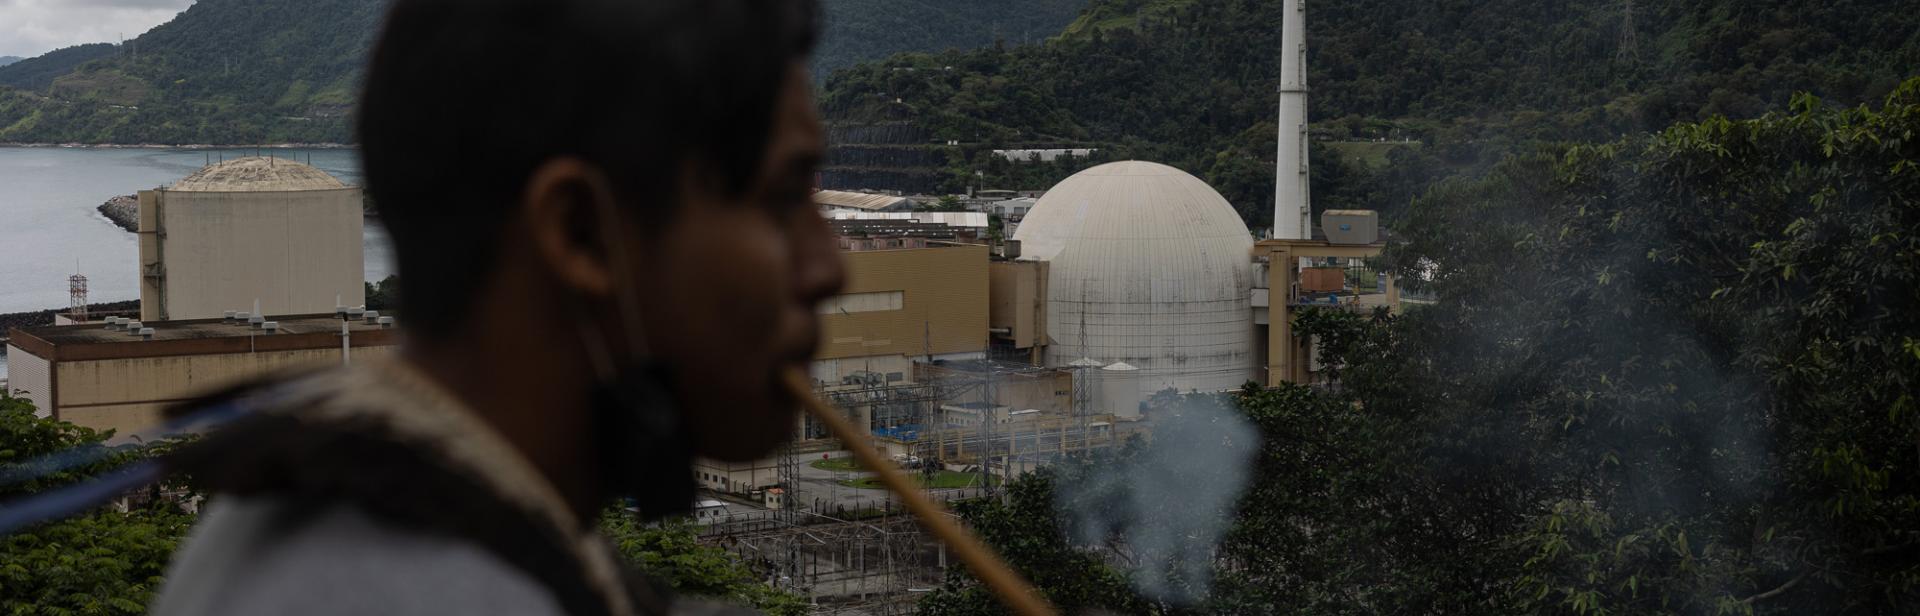 An indigenous man in the foreground, with a nuclear plant in the background